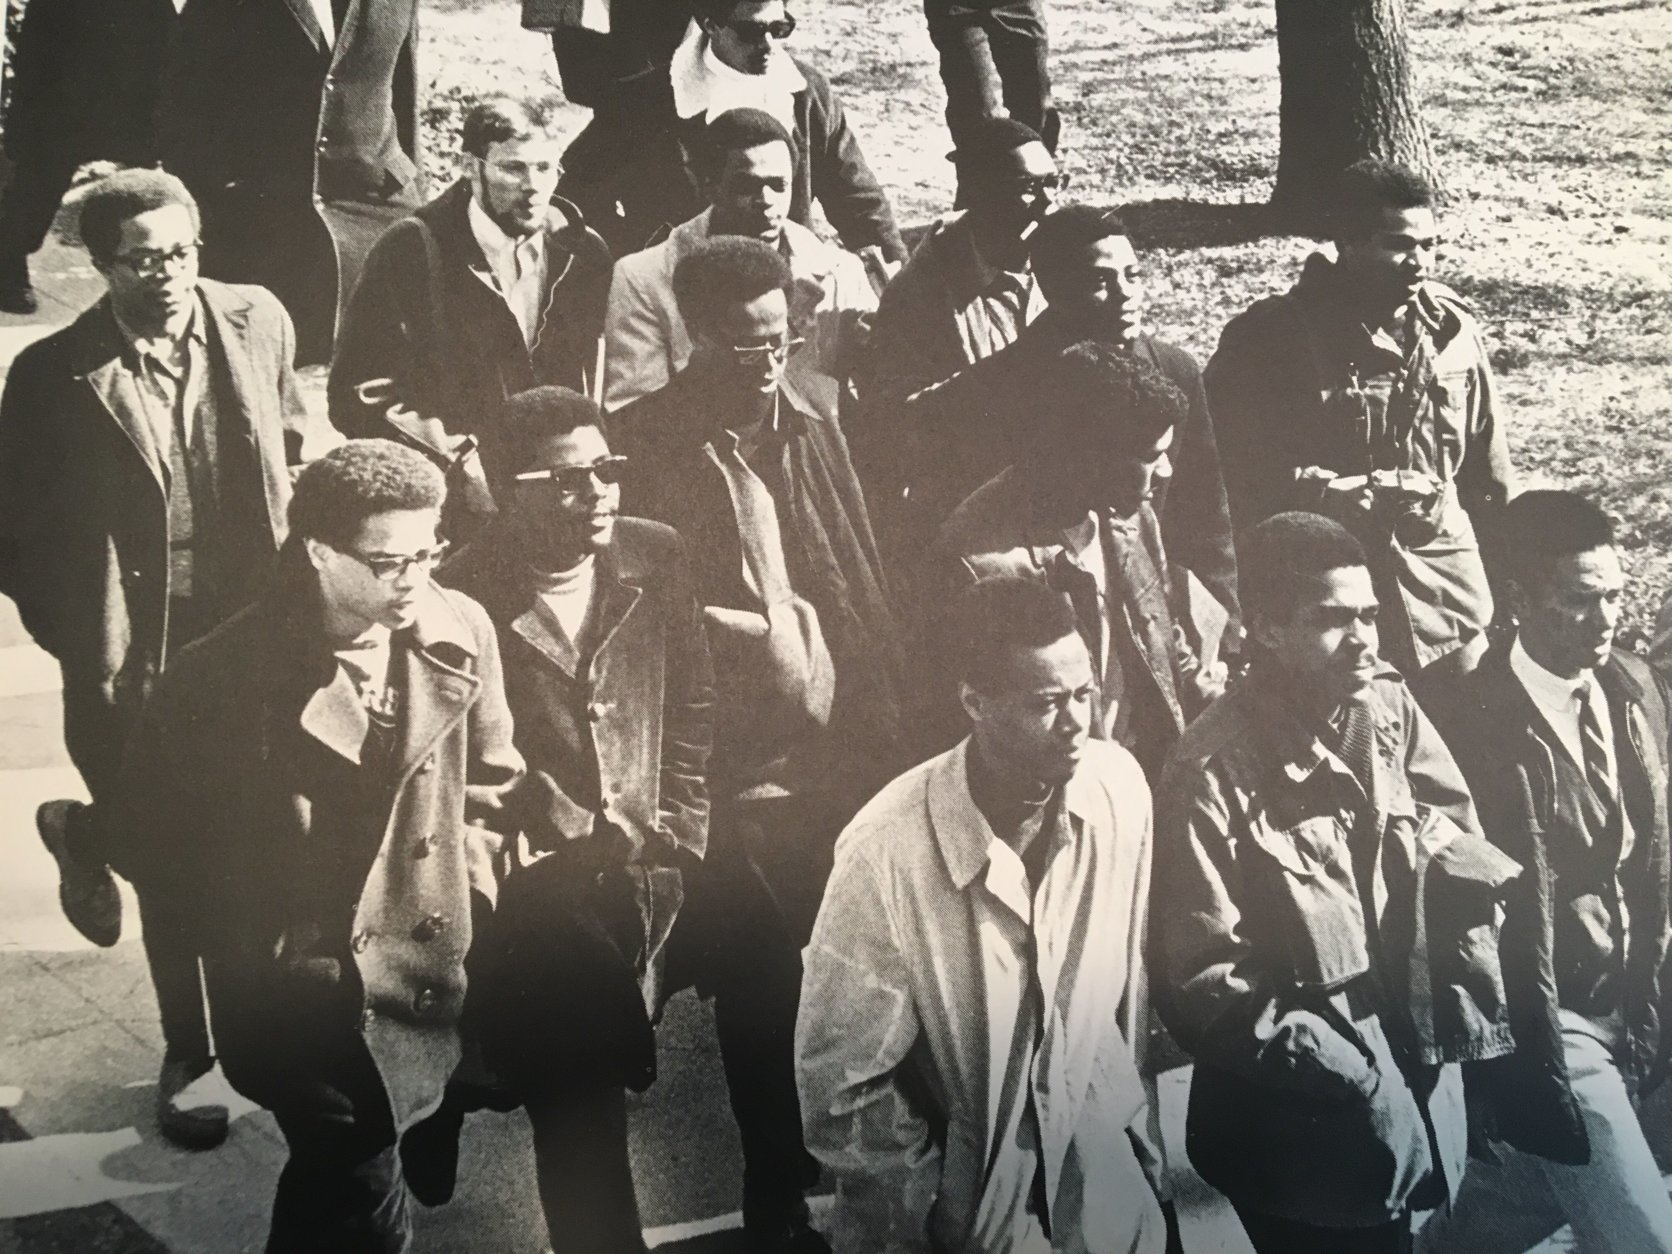 Students rally during the shutdown at Howard University in 1968. (Courtesy Anthony Gittens)